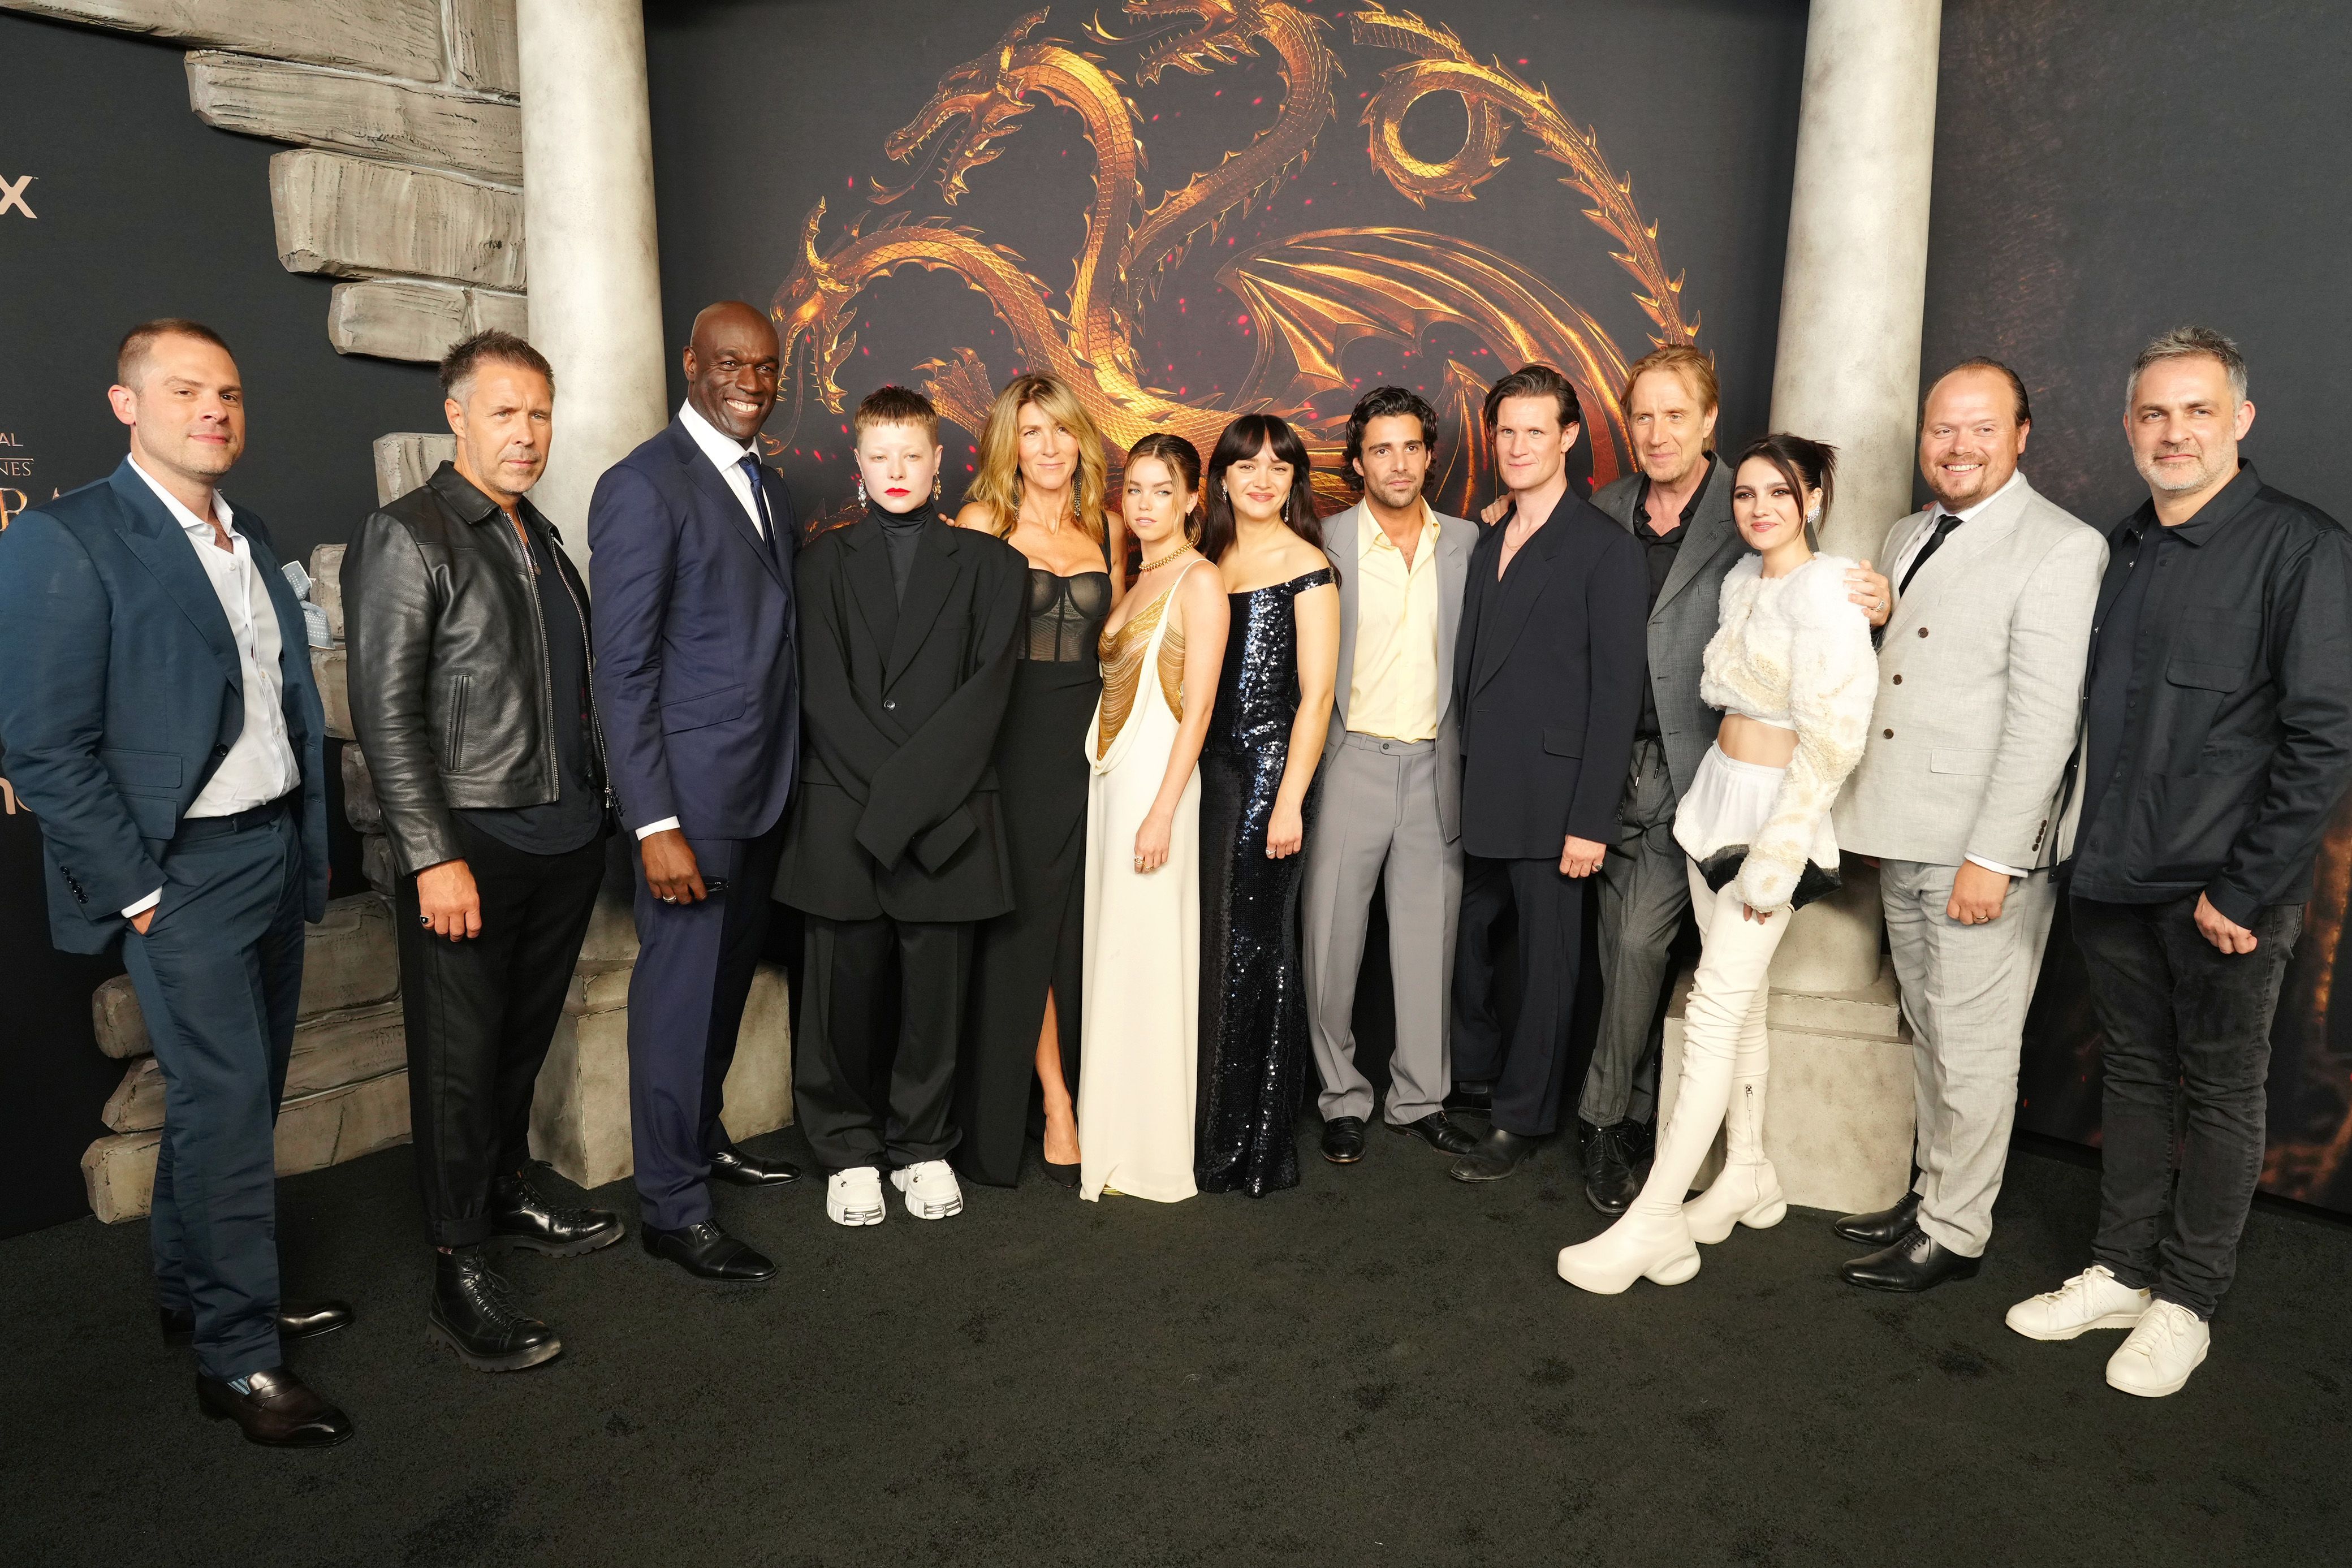 Meet the Cast of Max's 'House of the Dragon' - PureWow